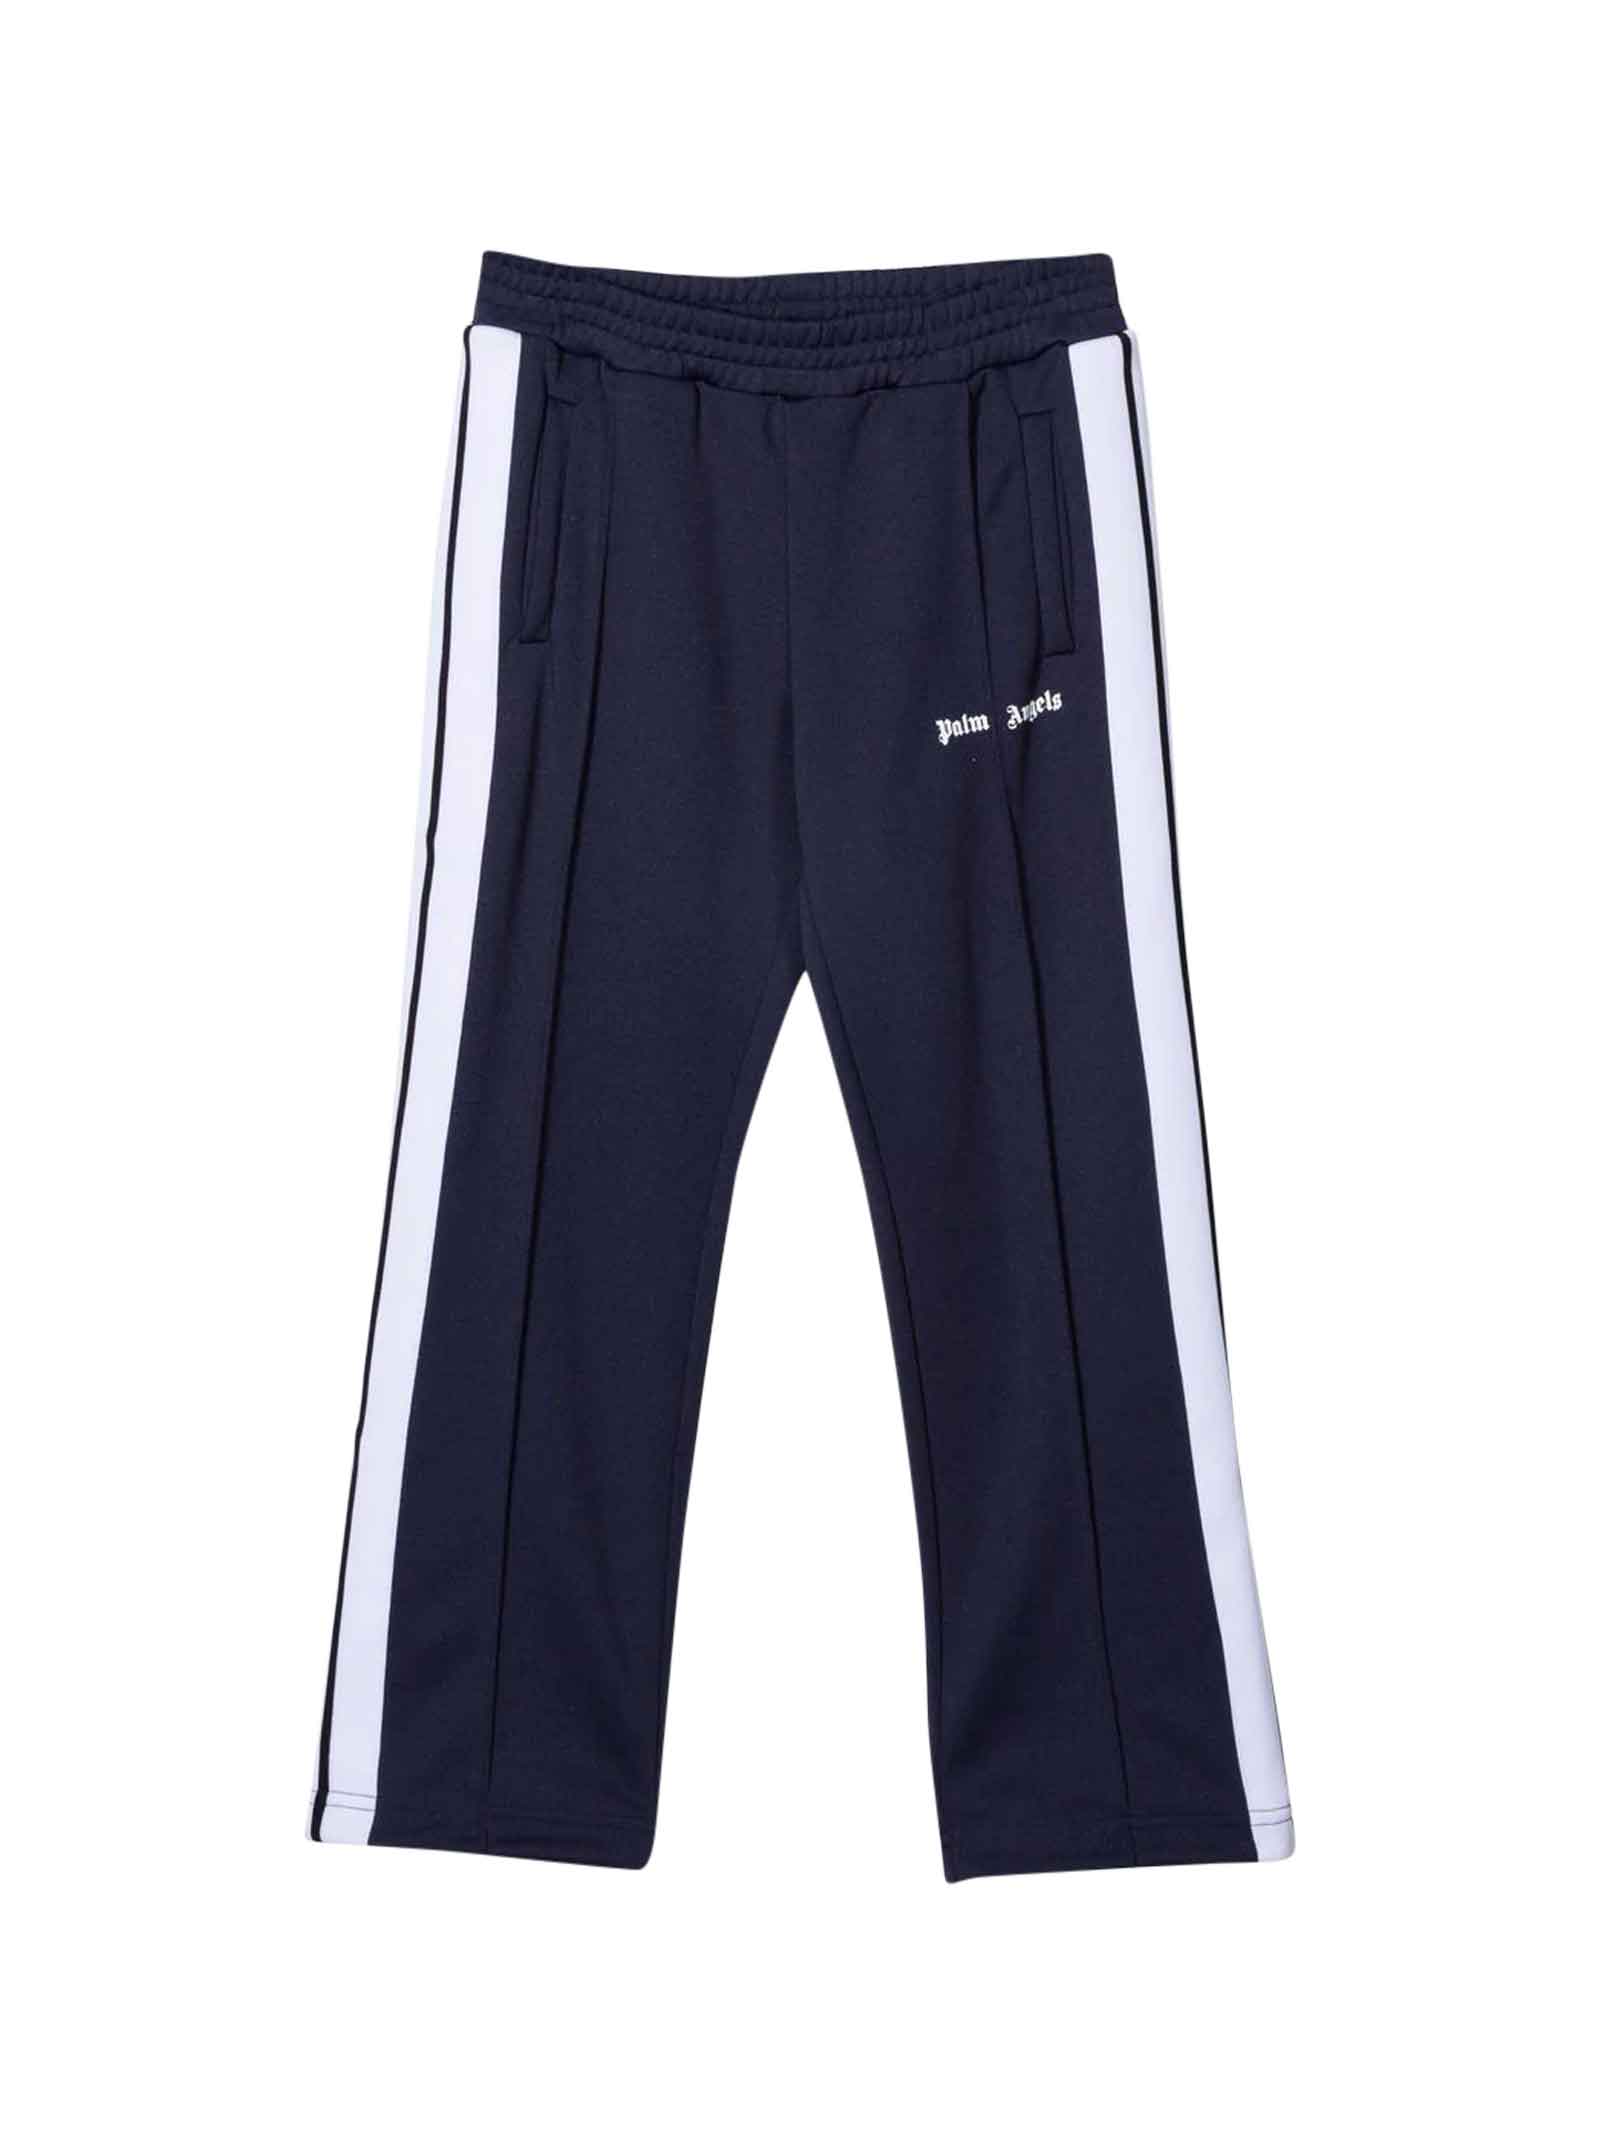 Palm Angels Blue Trousers With White Side Band